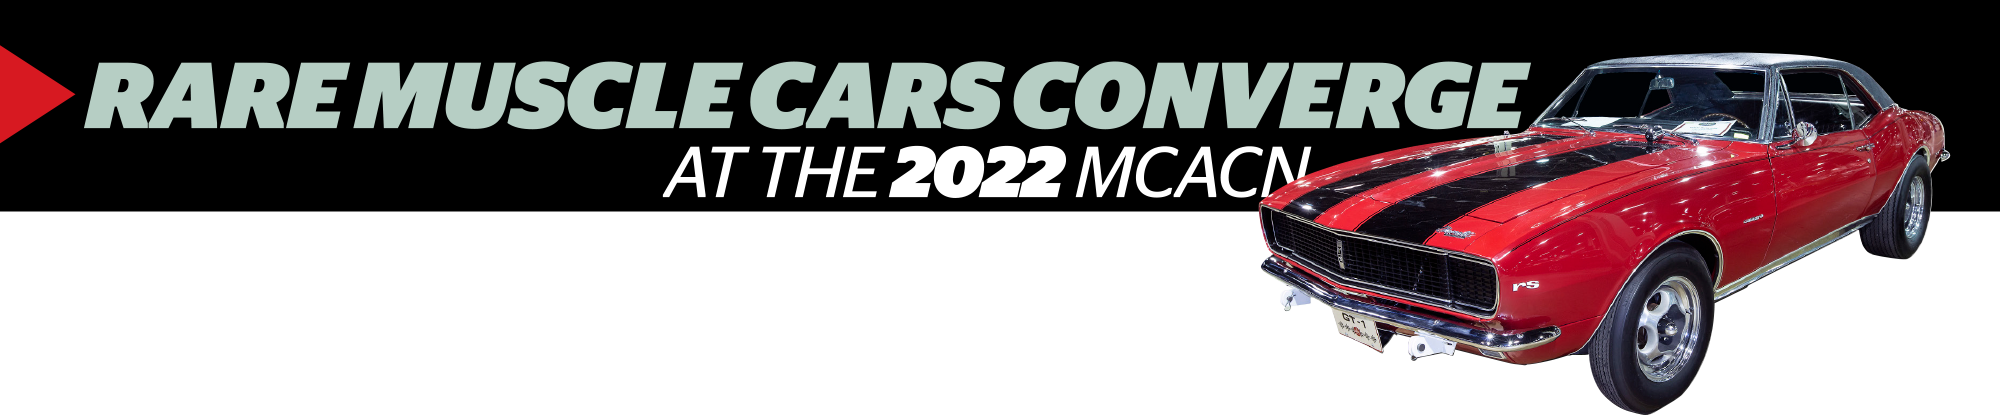 Rare Muscle Cars Converge at the 2022 MCACN